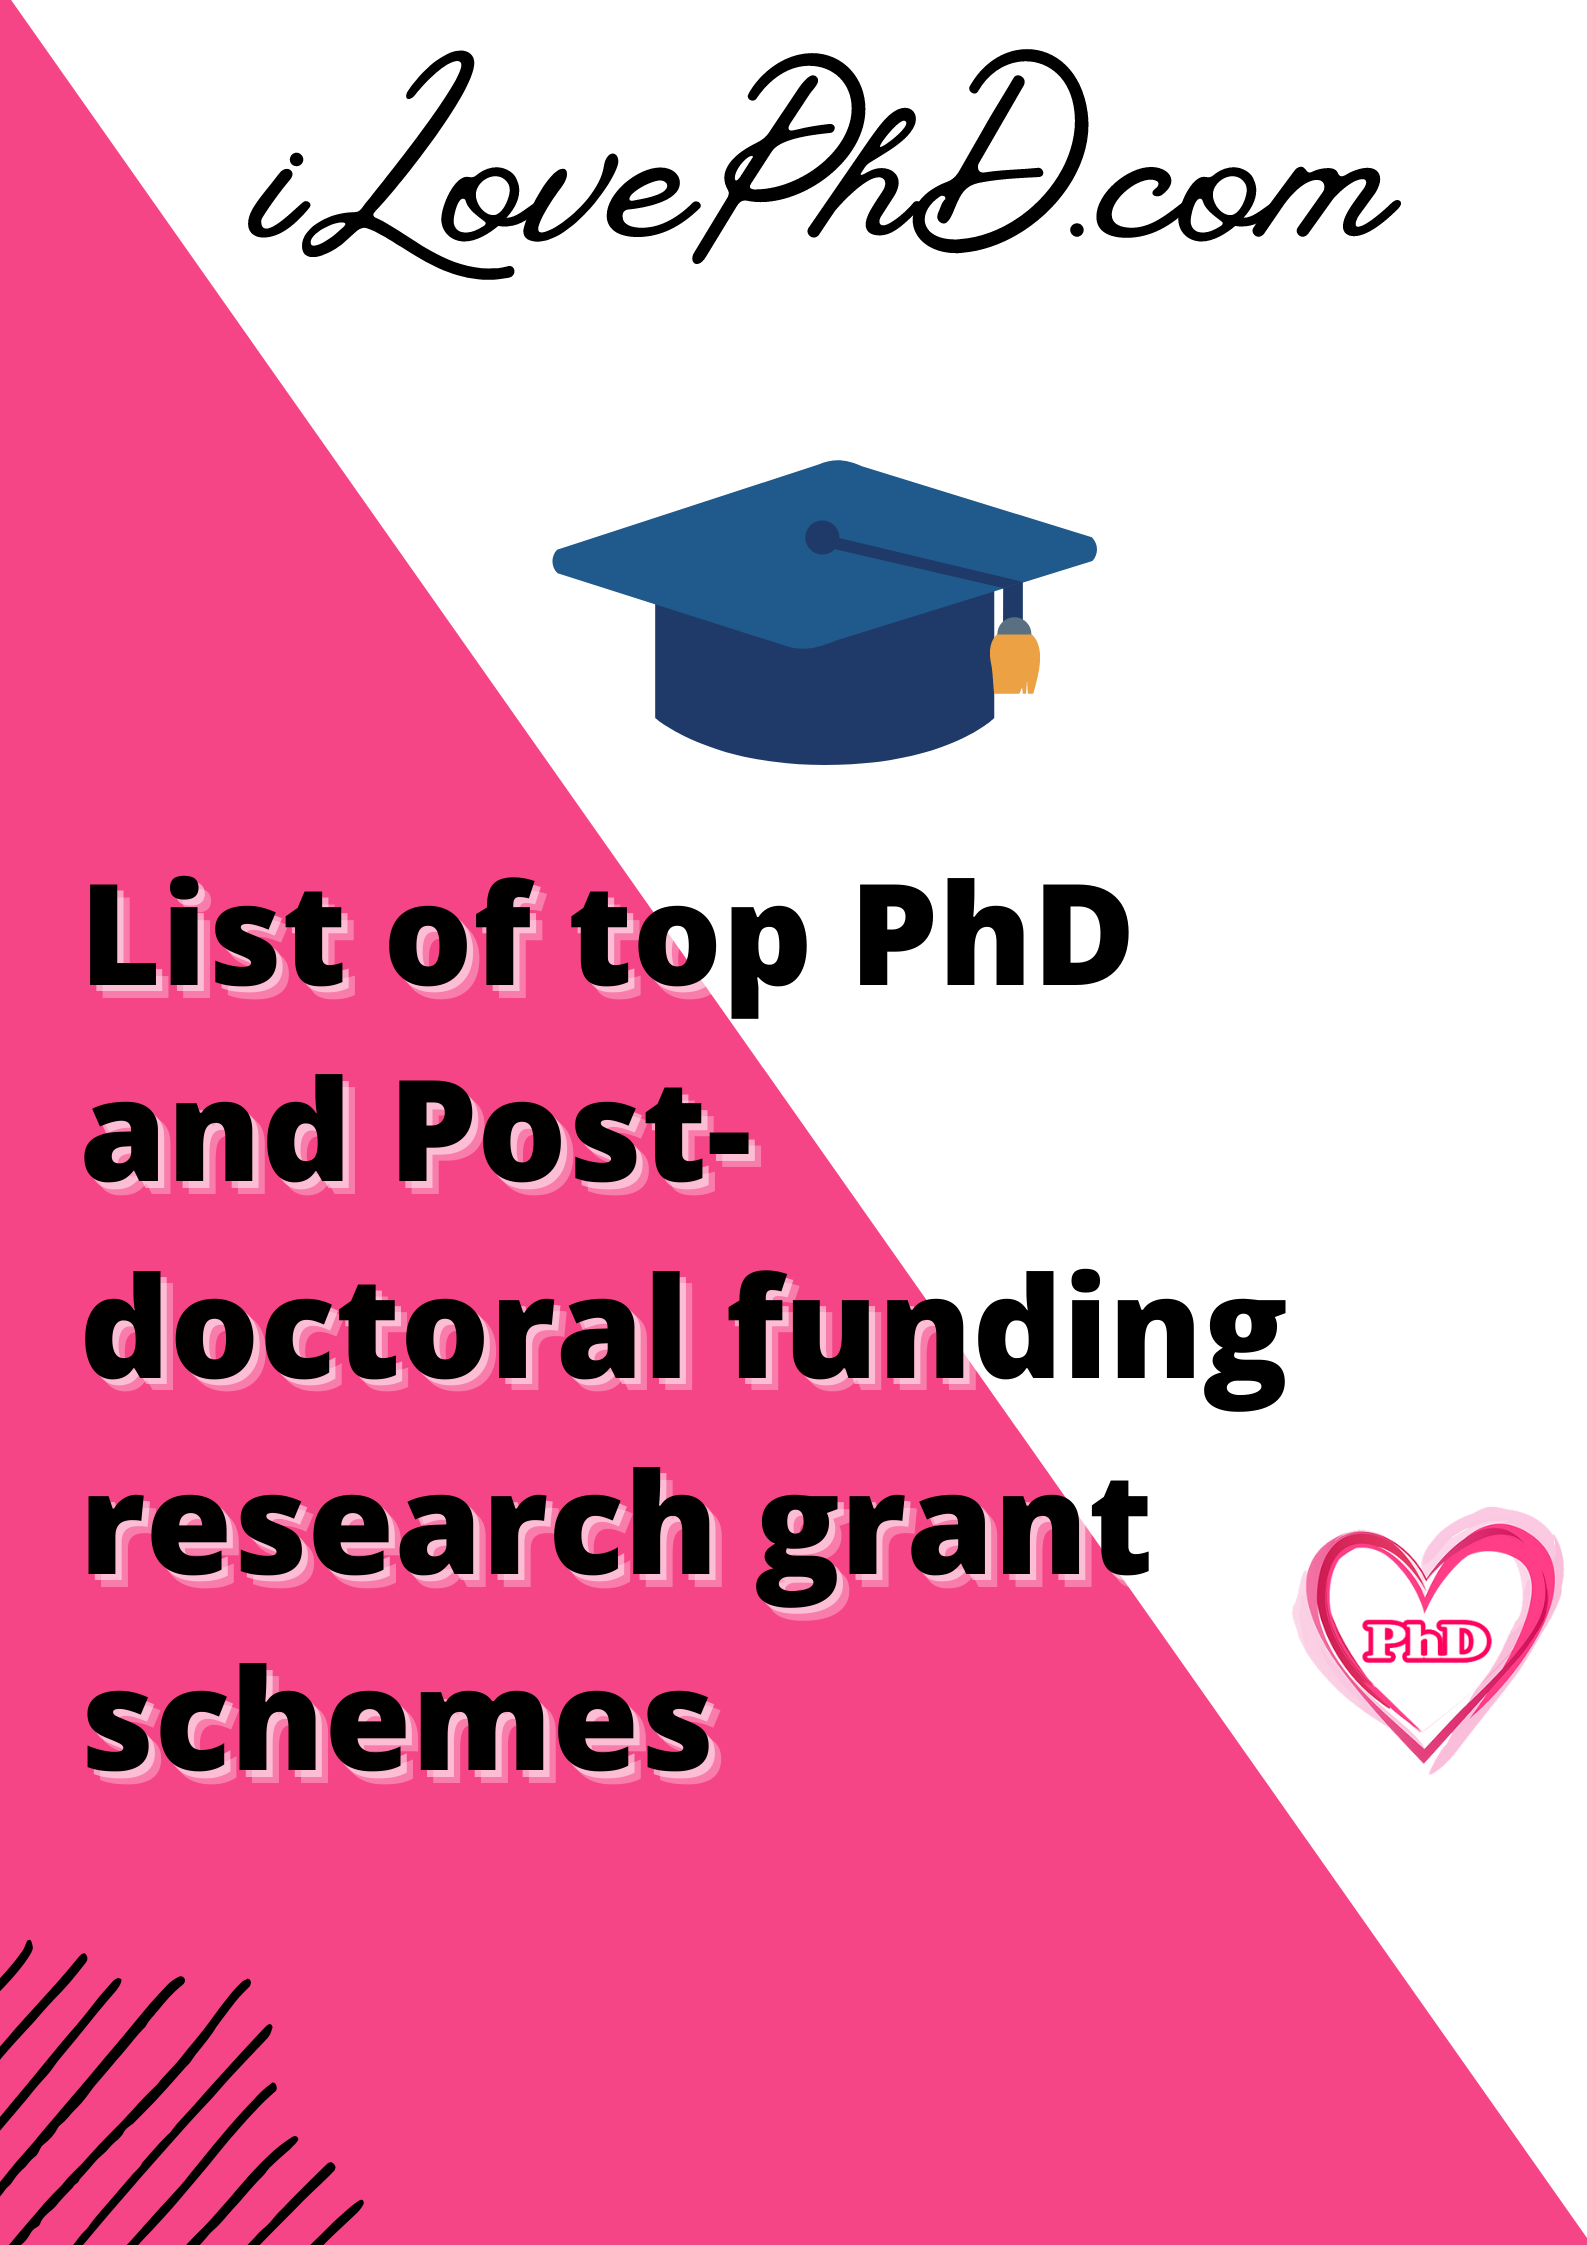 phd research funding opportunities in india